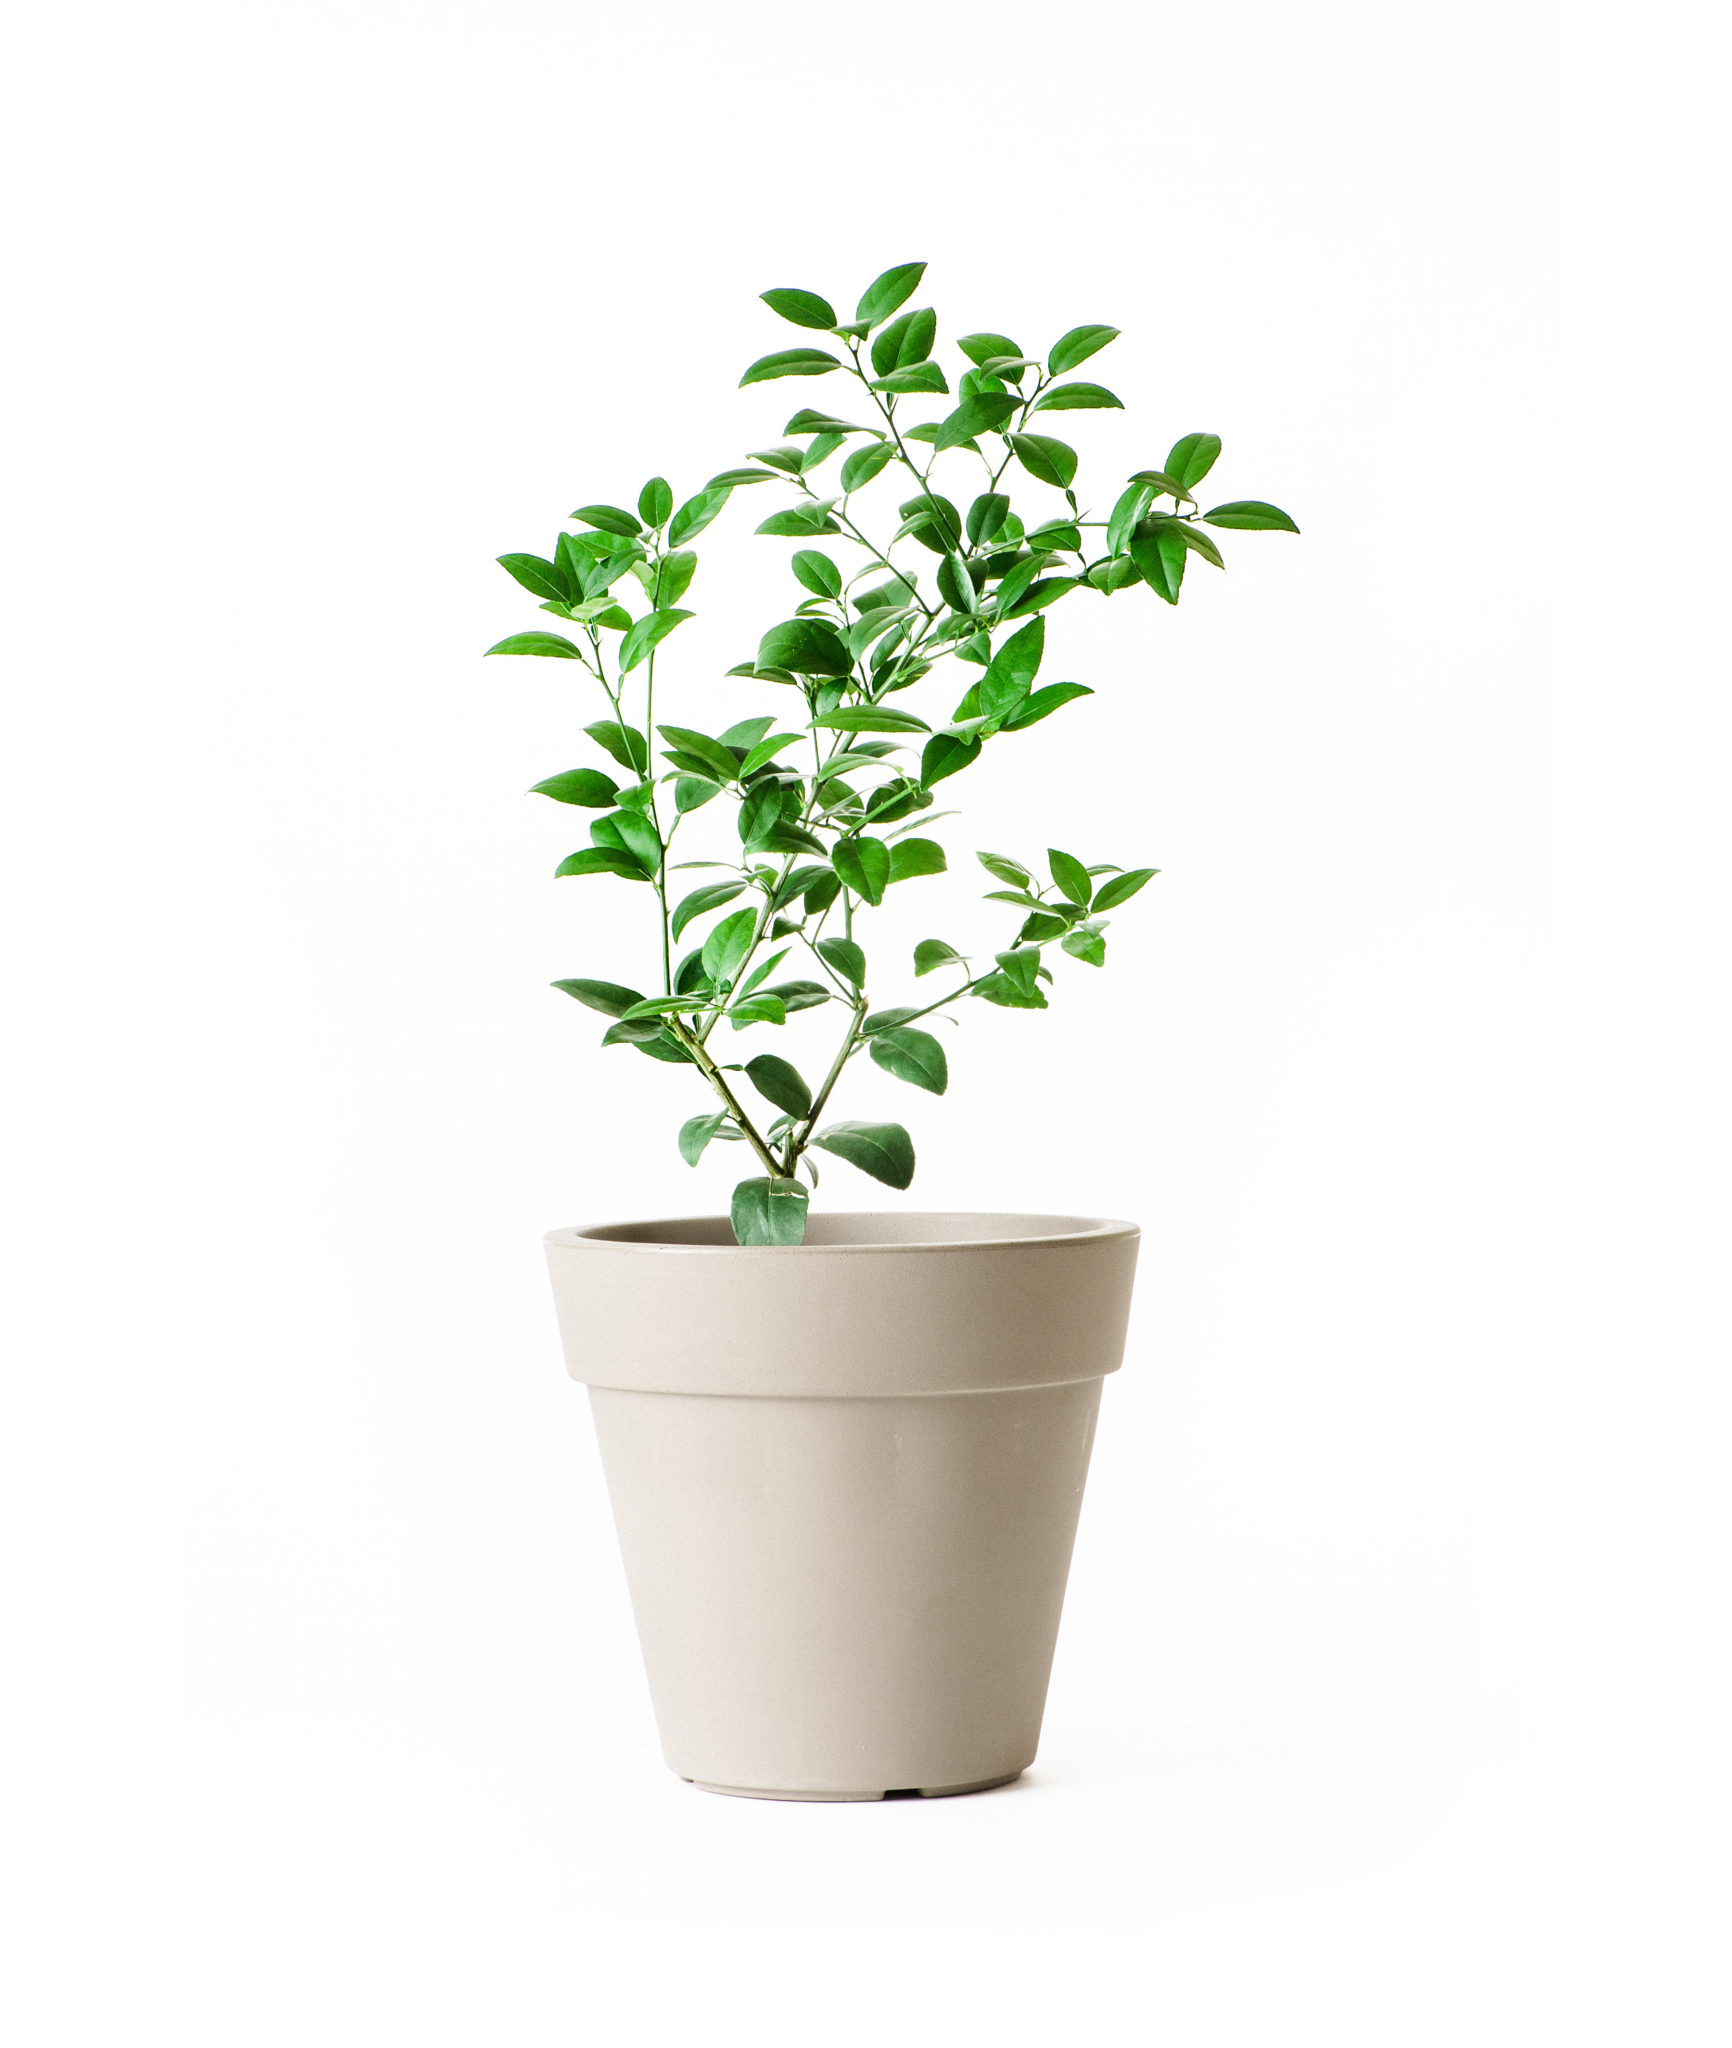 Image of Dwarf Key Lime Tree (Age: 4 - 5 Years Height: 3 - 4 FT)